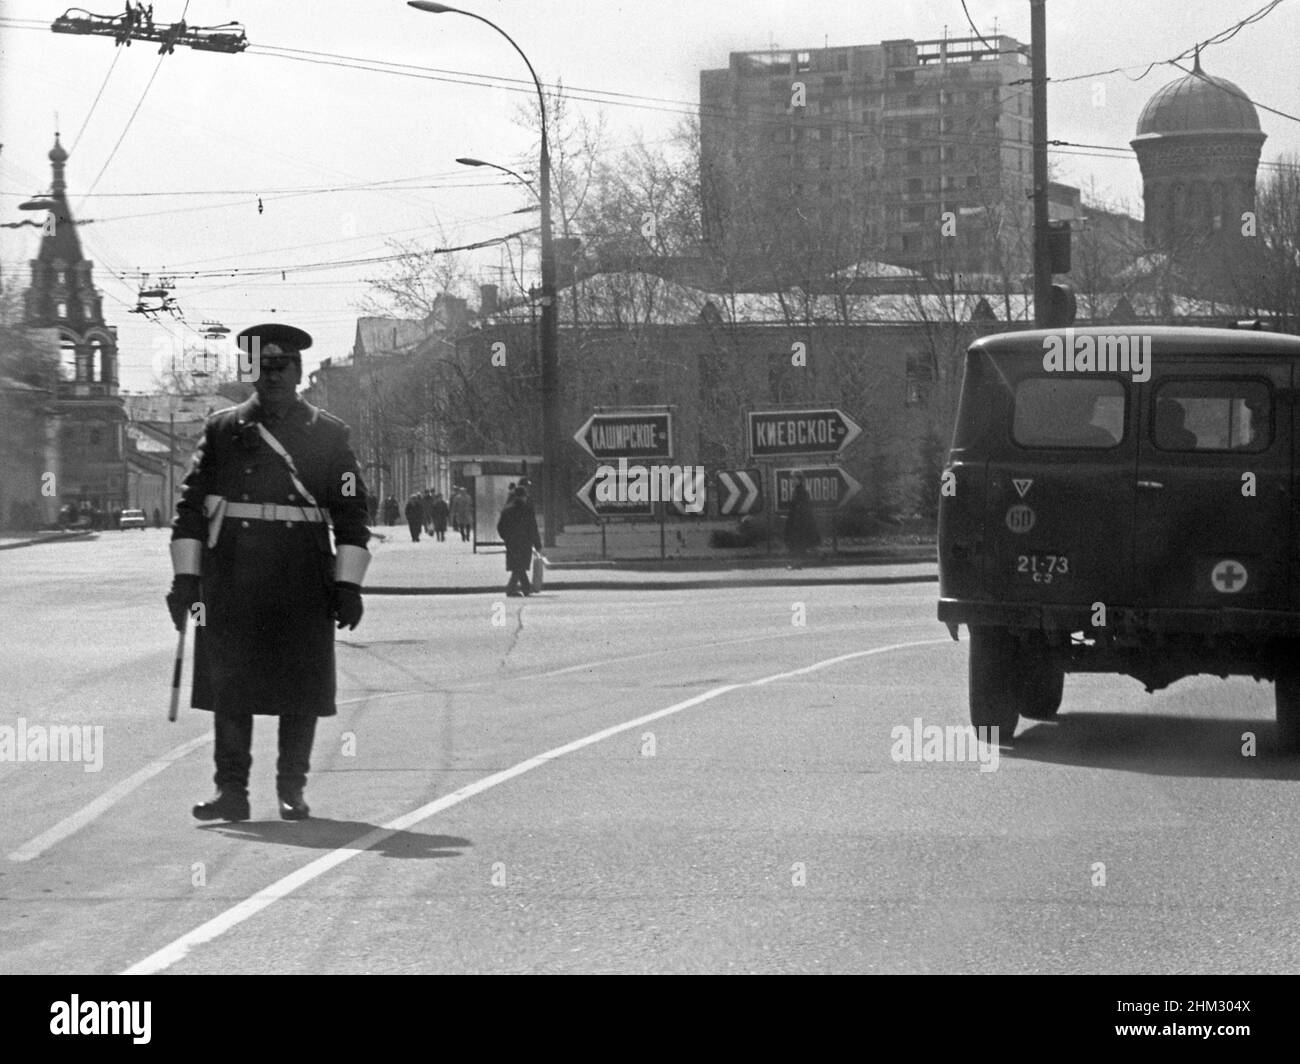 Traffic cop. Moscow, Russia, USSR, April 1976 Stock Photo